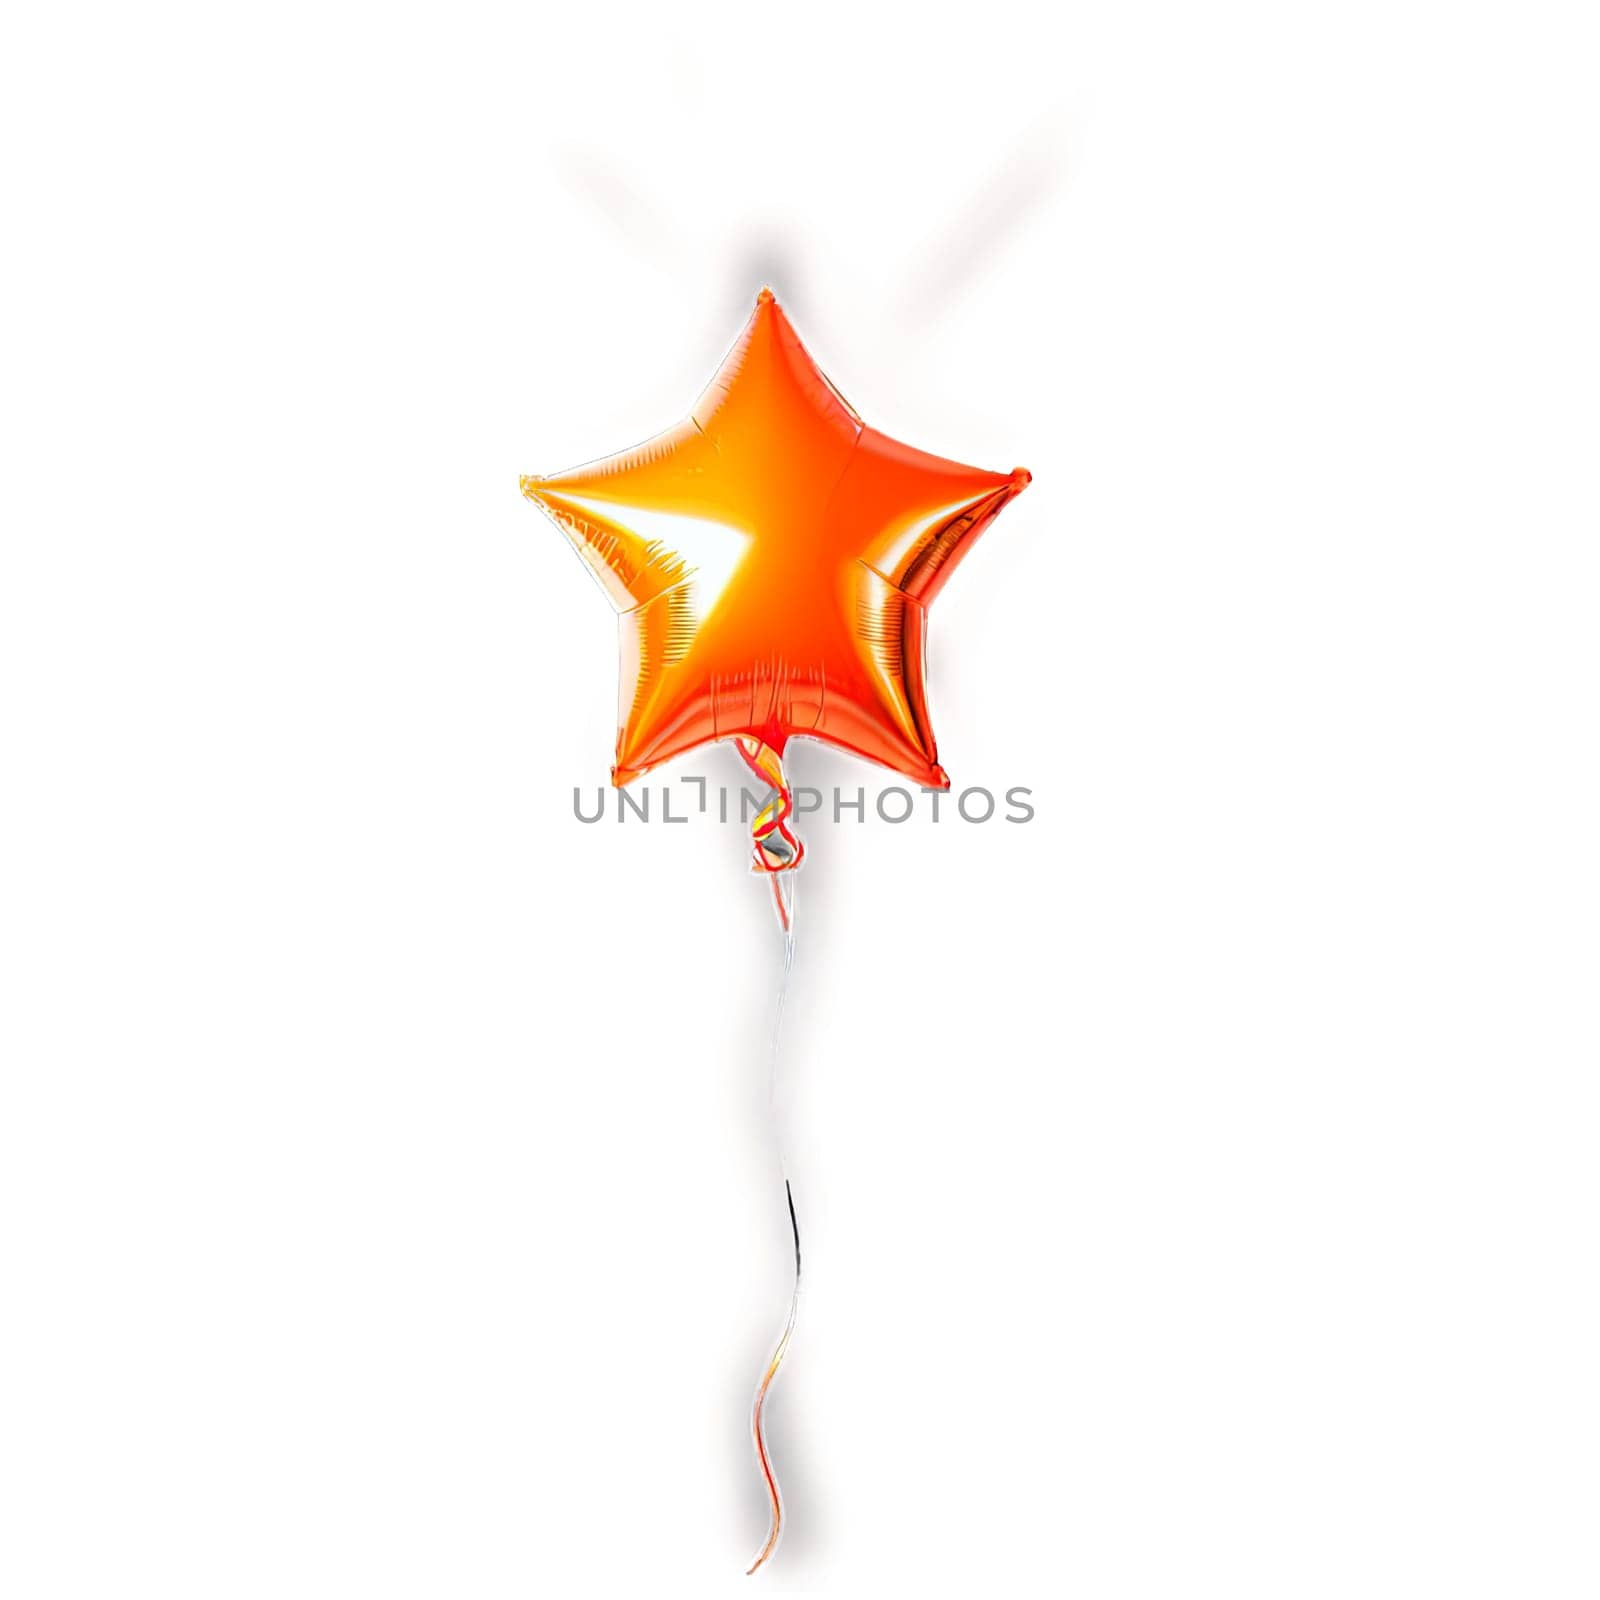 Star-shaped balloon floats against transparent background. Captured during celebration for decorative purpose